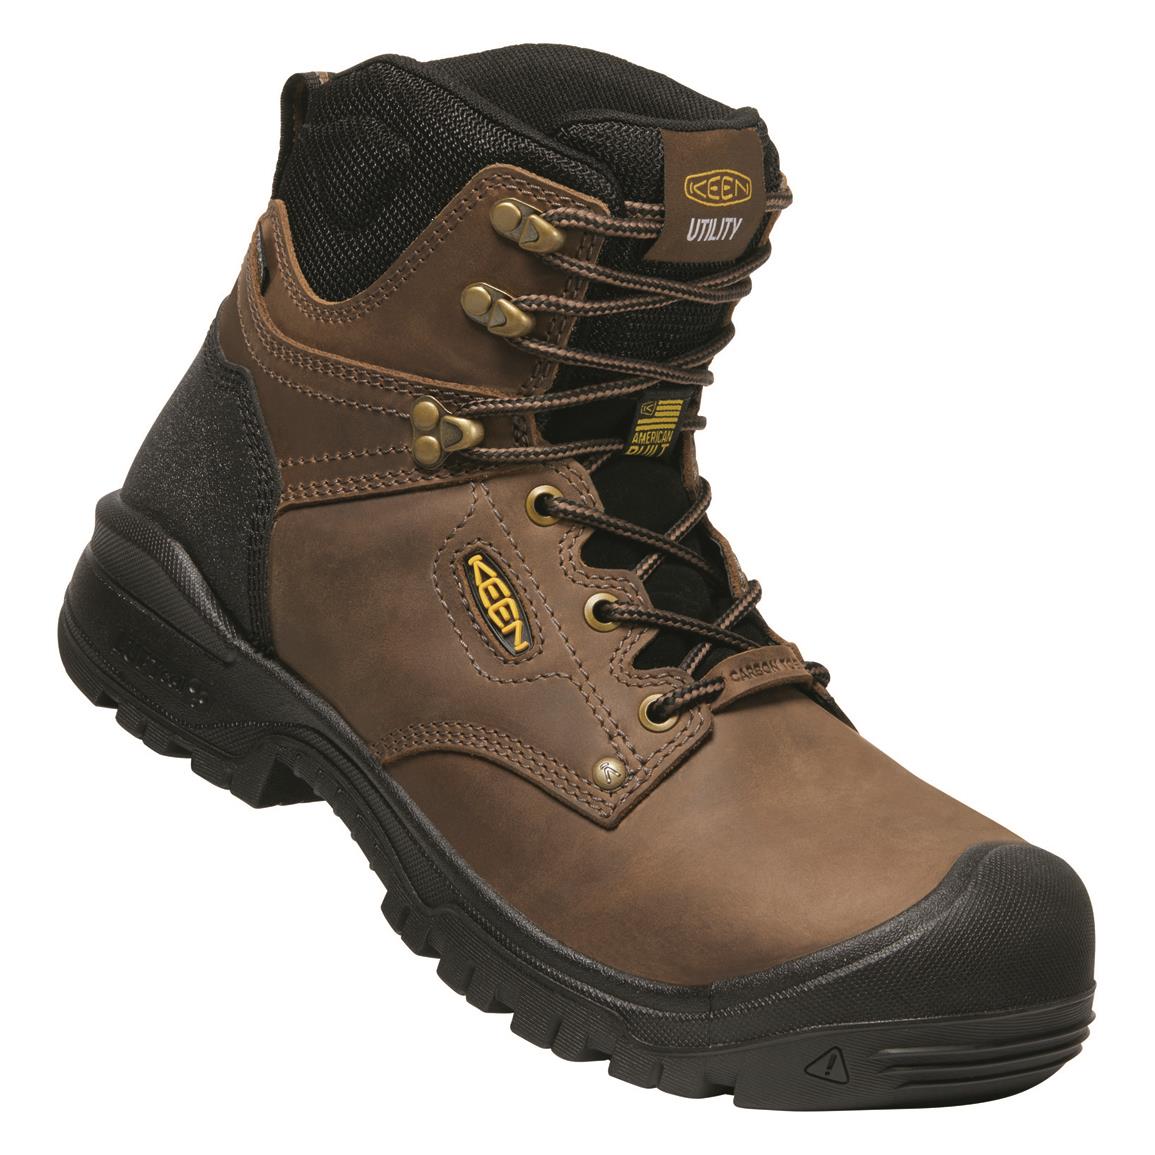 KEEN Utility Men's Independence 6" Waterproof Safety Toe Work Boots, Dark Earth/black